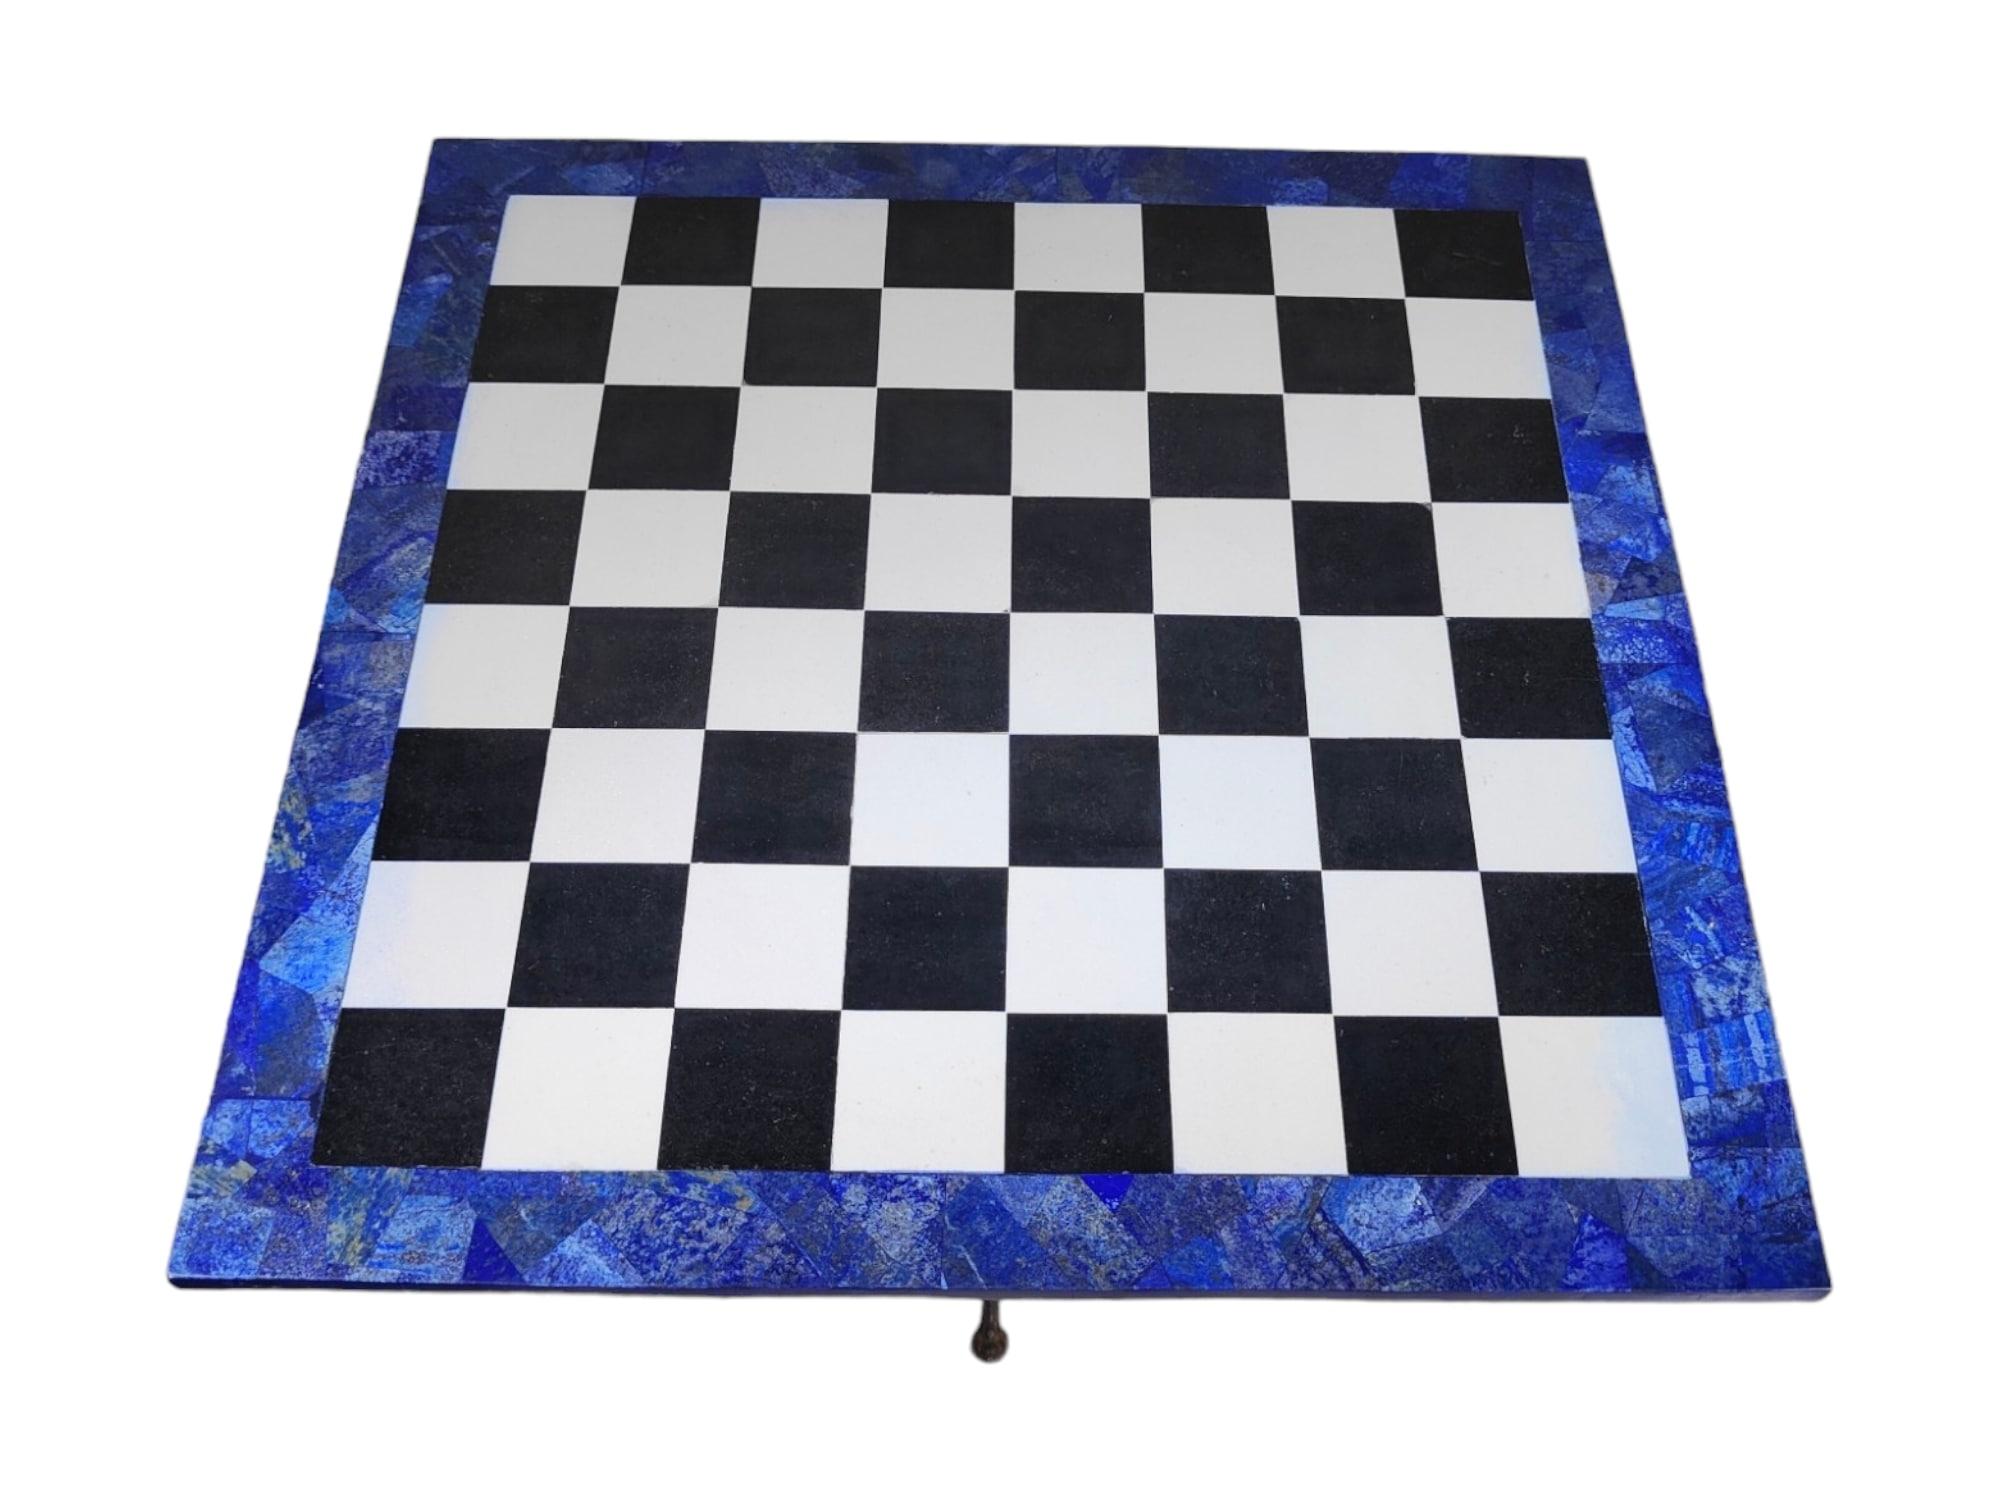 Italian Chess Table from the 1950s - Lapis Lazuli, Marble, and Dragon-Shaped  For Sale 7